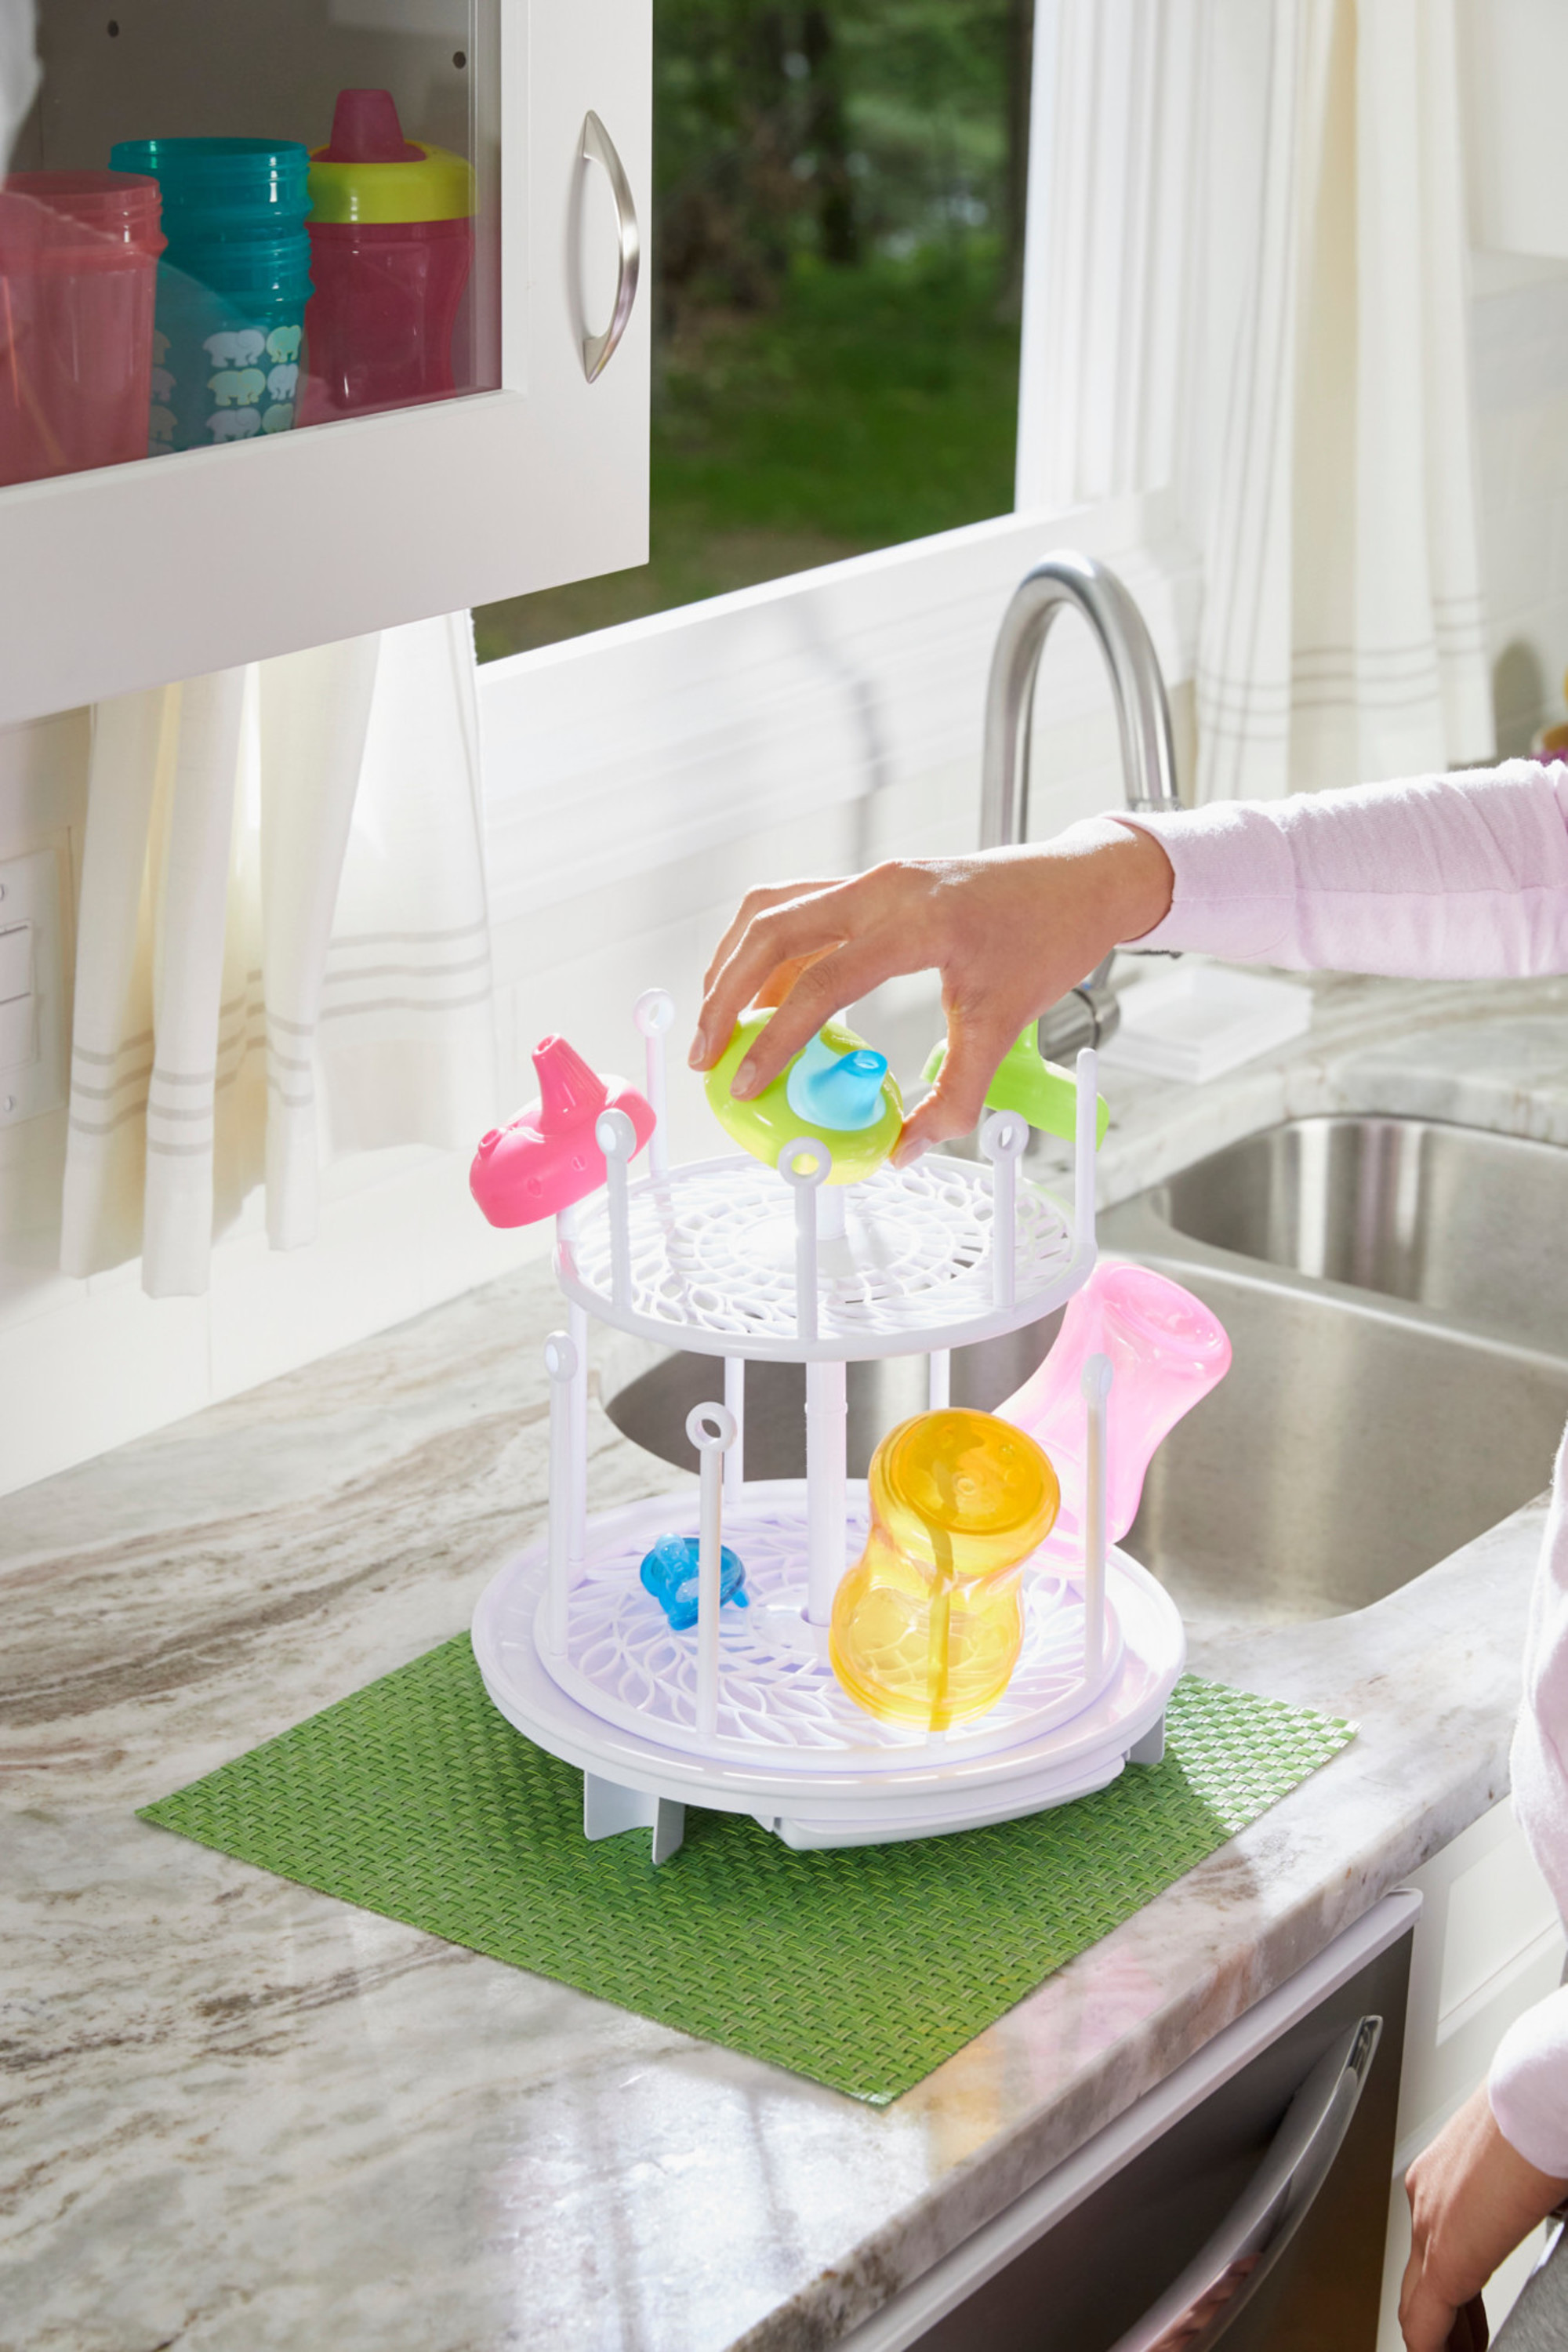 The First Years Spin Stack Drying Rack – Kitchen Countertop Dish Rack for Baby Bottles and Other Baby Essentials – White - image 2 of 10